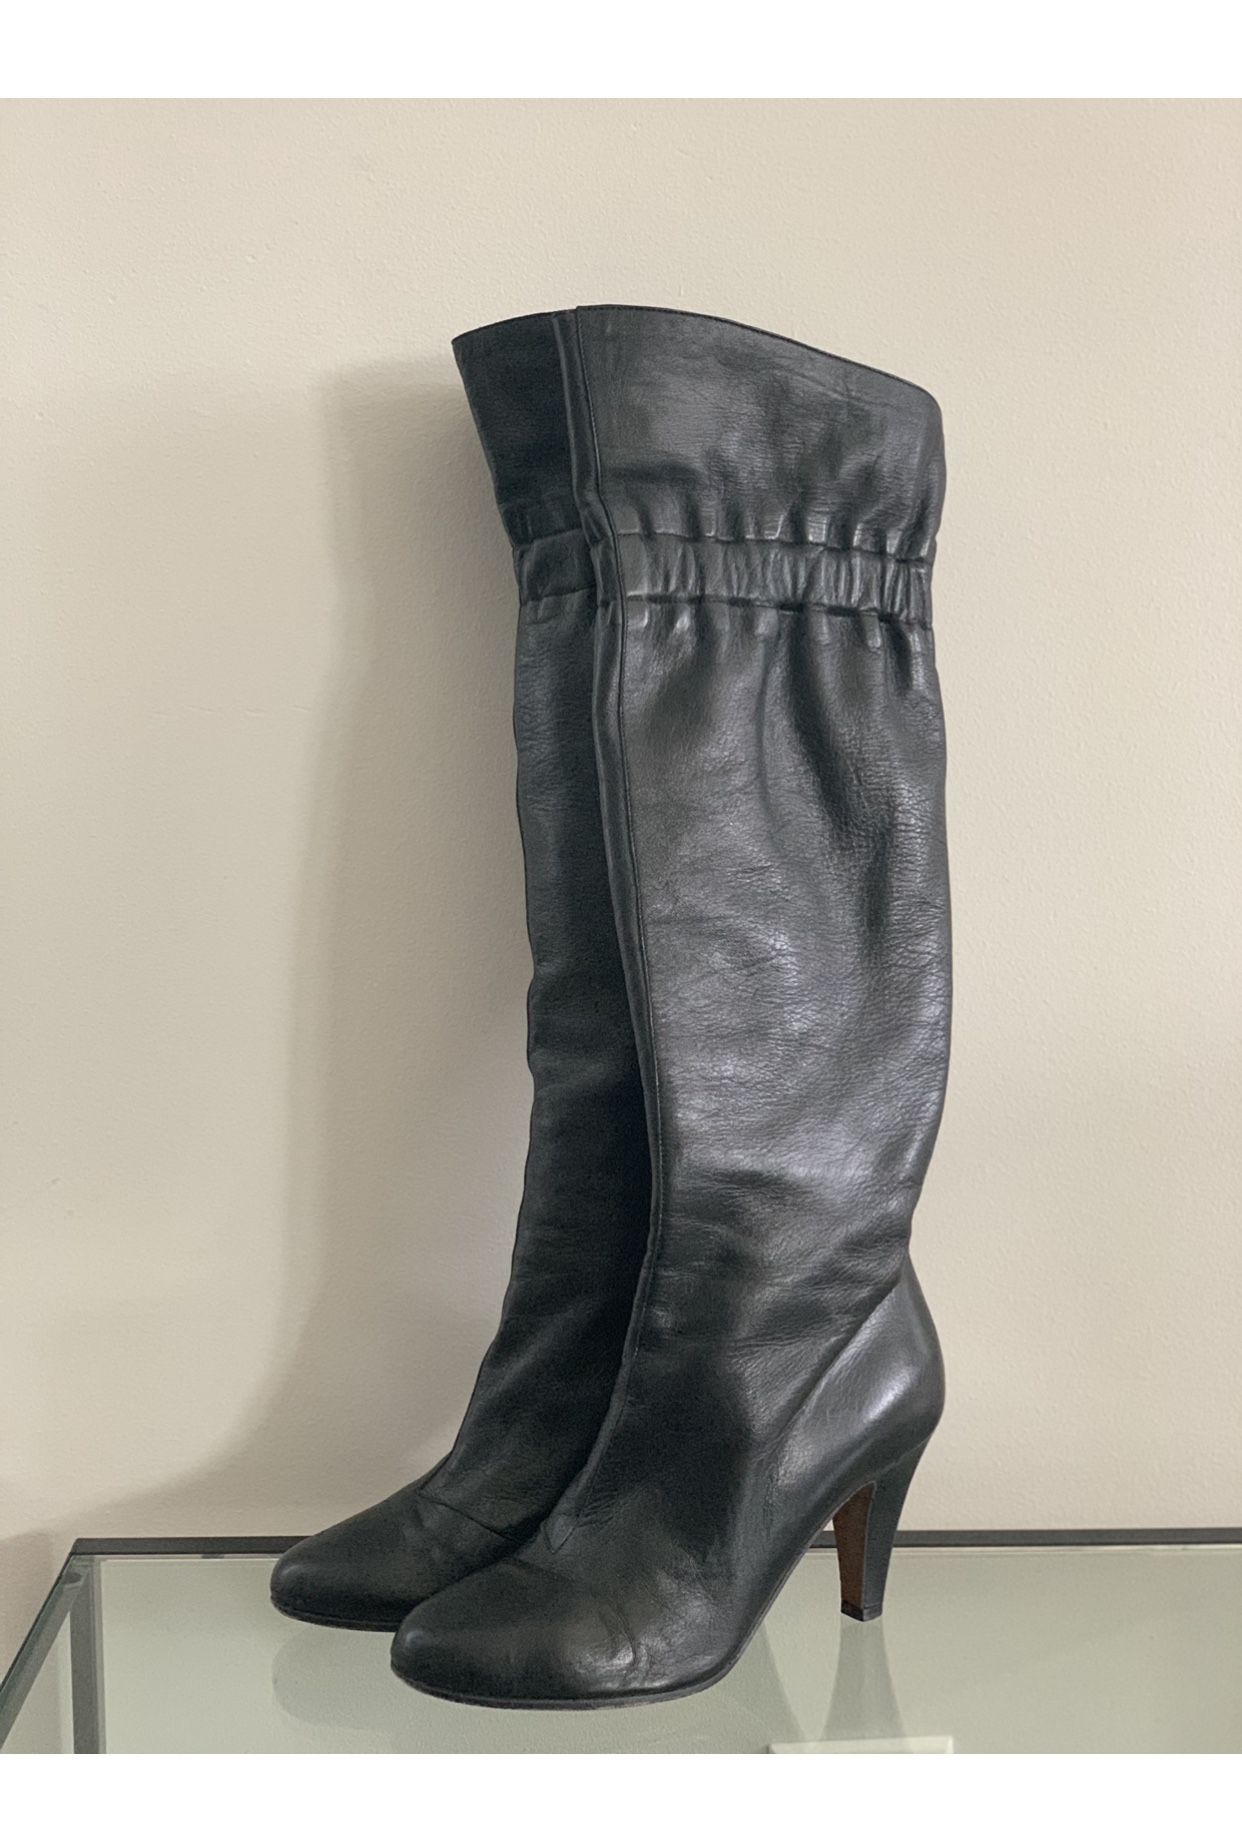 Moschino Cheap &  Chic Tall Boots-black-size 6.5 Italy